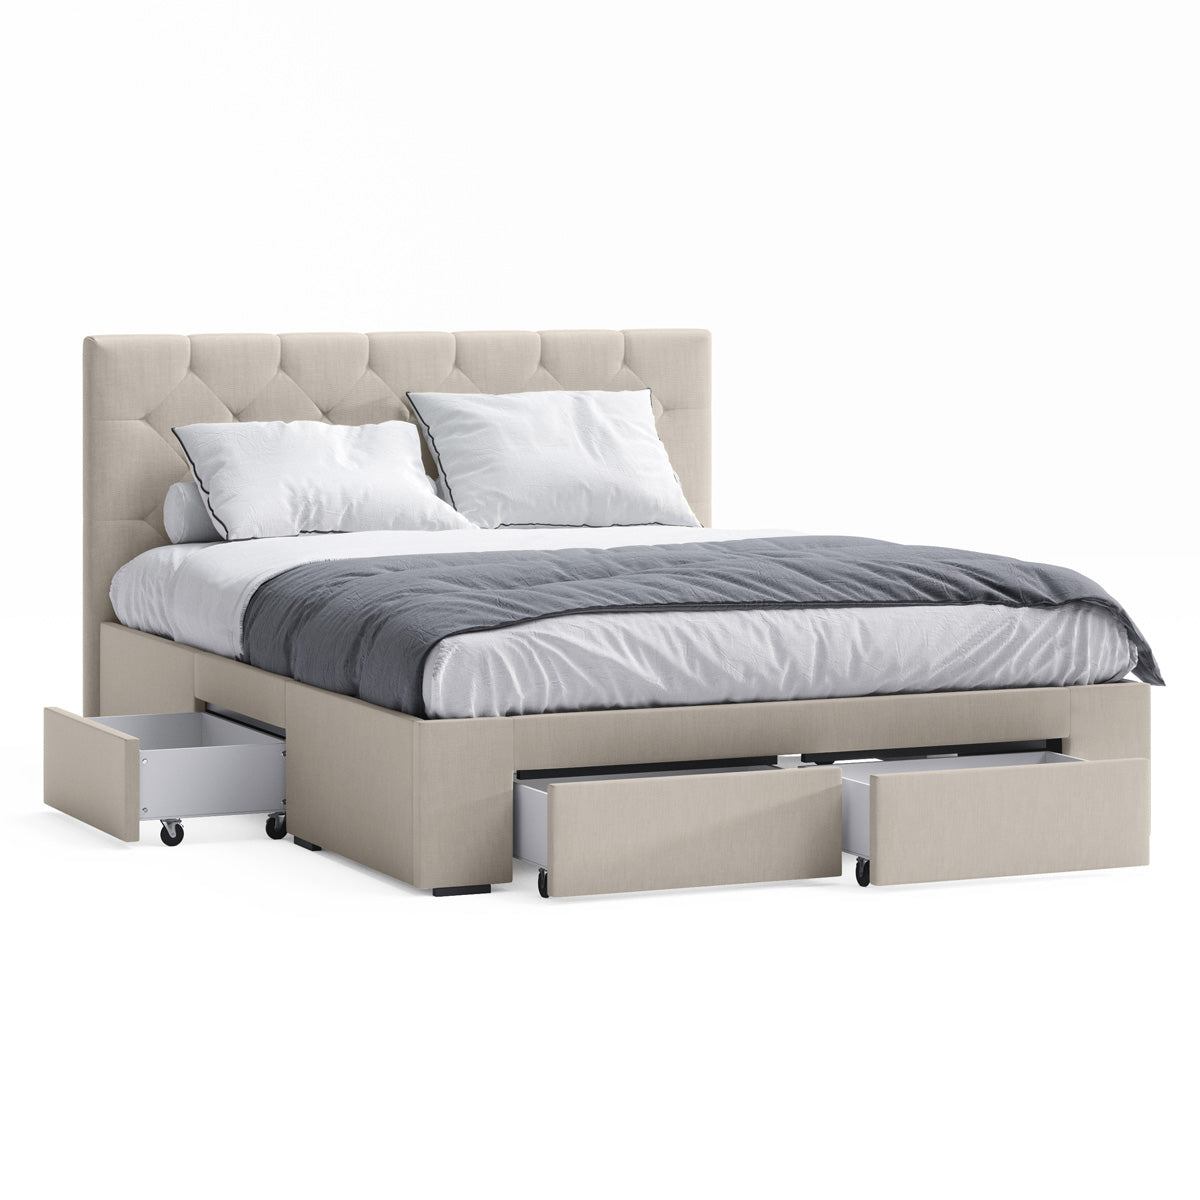 Webster Bed Frame with Four Storage Drawers (Natural Beige Fabric)